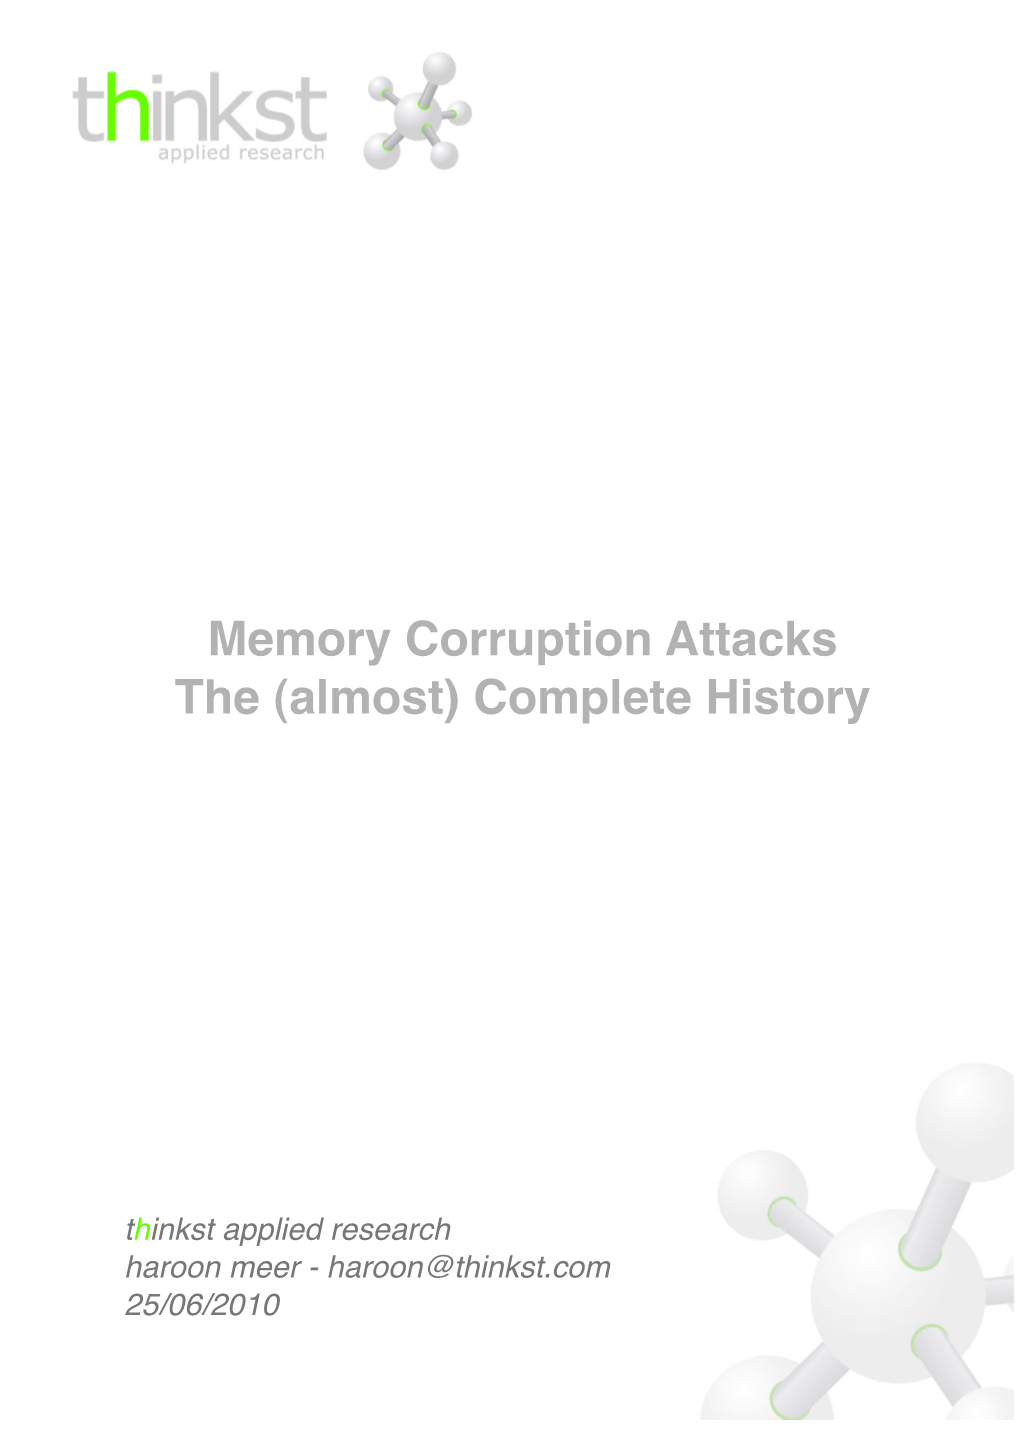 Memory Corruption Attacks the (Almost) Complete History